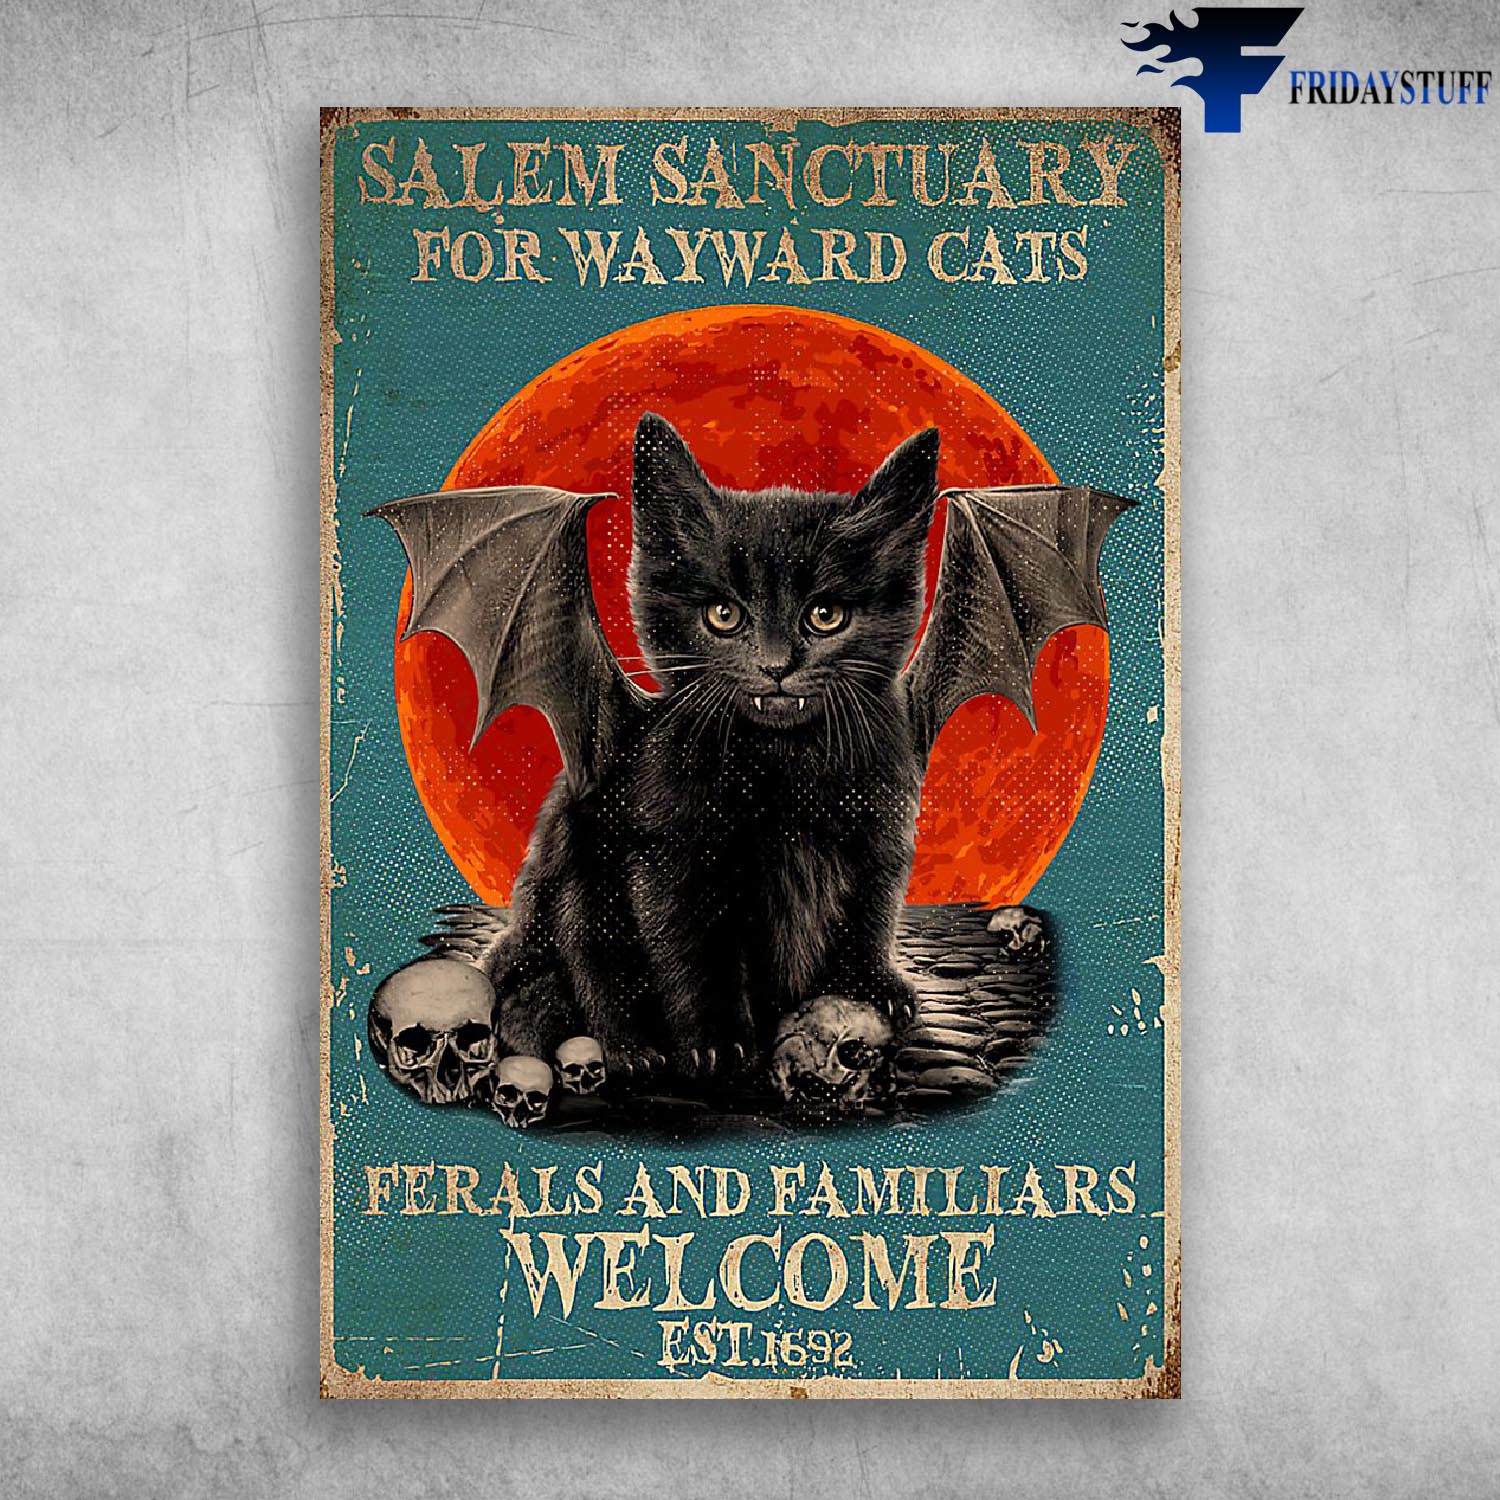 Black Cat And Skull - Salem Sanctuary For Wayward Cats Ferals And Familiars Welcome Est 1962